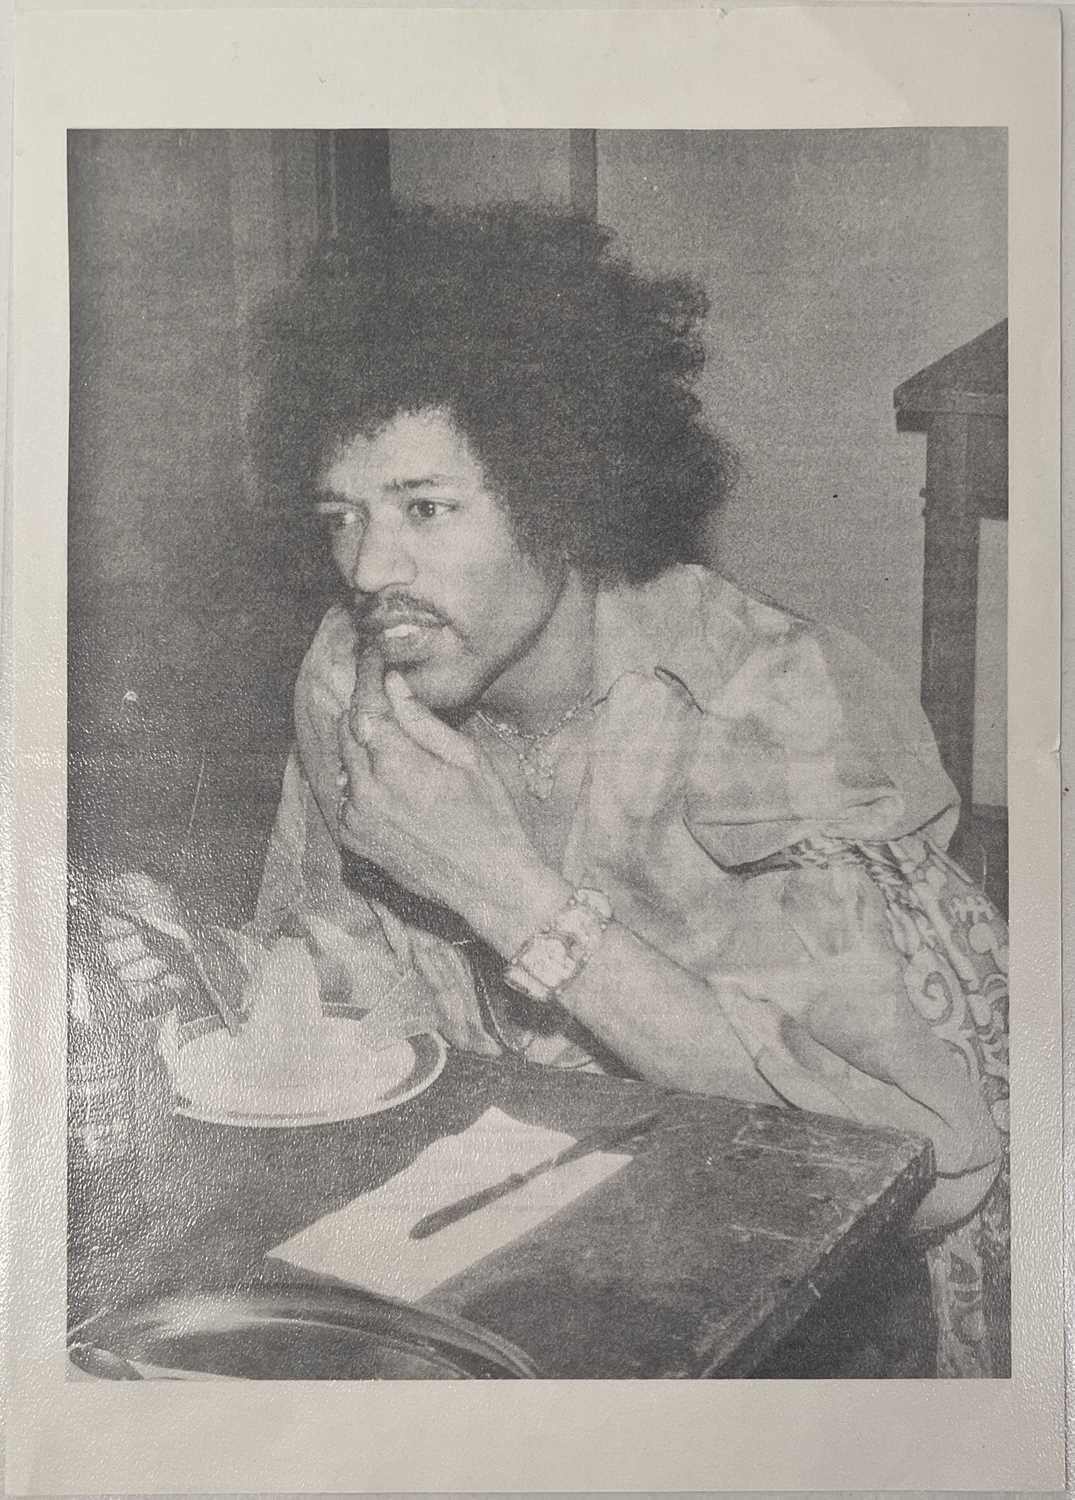 JIMI HENDRIX - AN ORIGINAL AND COMPLETE 1974 FAN CLUB NEWSLETTER. - Image 6 of 16